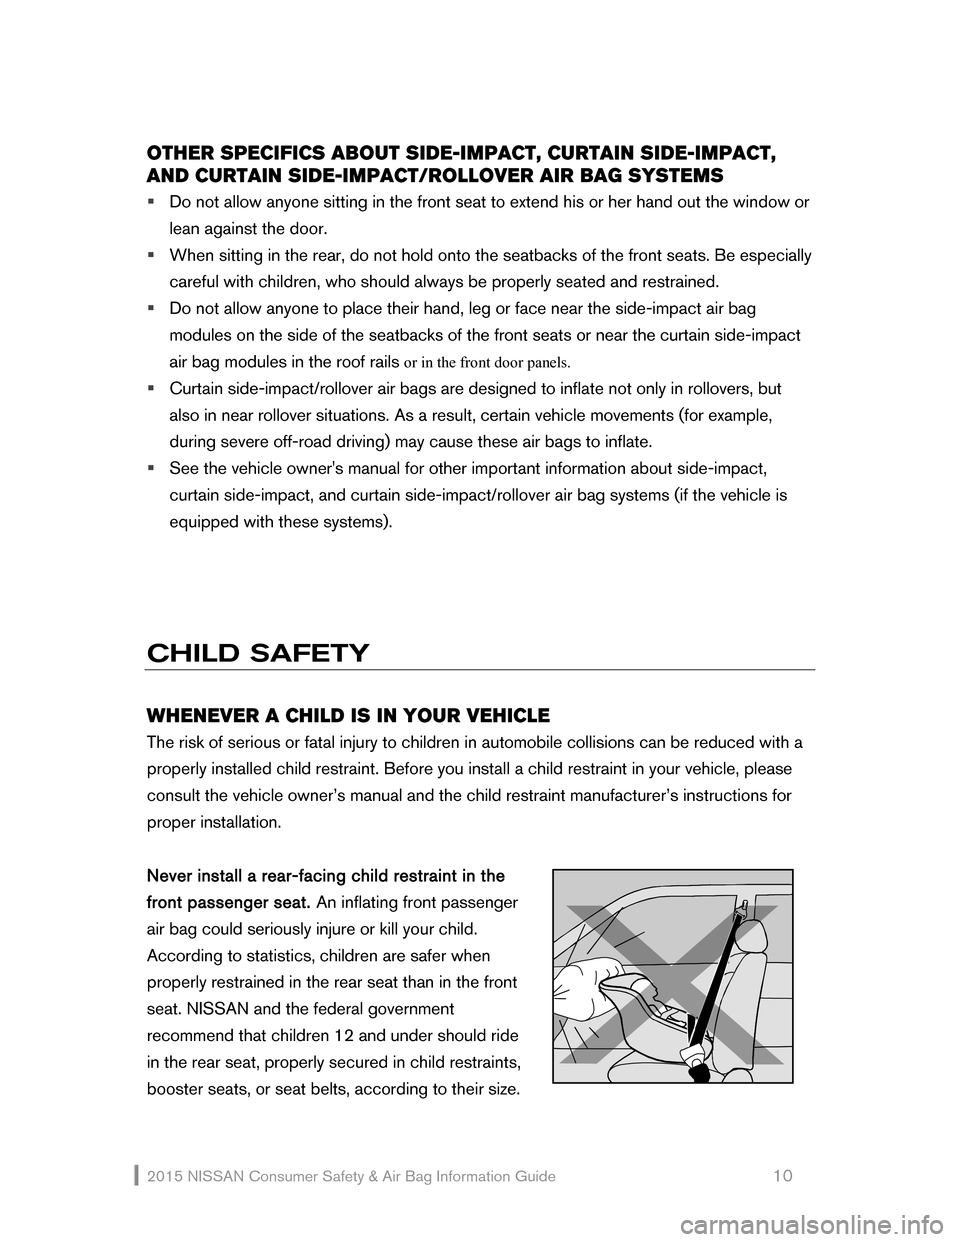 NISSAN XTERRA 2015 N50 / 2.G Consumer Safety Air Bag Information Guide 2015 NI\f\fAN  Consumer \fafety  & Air Bag Information Guide                                                     10 
OTHER SPE\fIFI\fS ABOUT SIDE-IMPA\fT, \fURTAIN SIDE-IMPA\fT, 
AND \fURTAIN SIDE-IMP